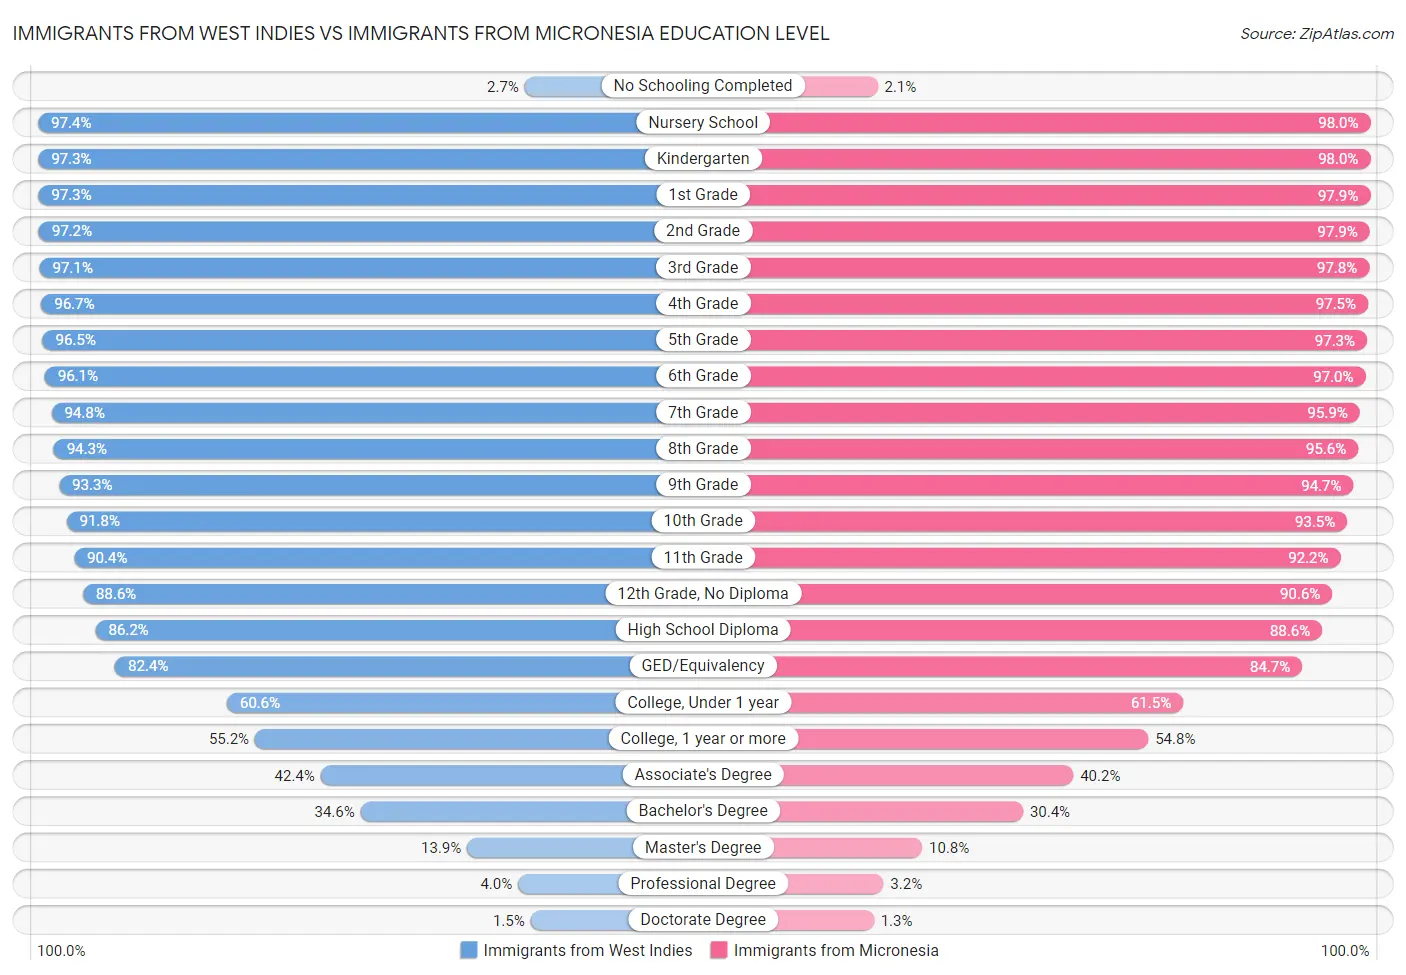 Immigrants from West Indies vs Immigrants from Micronesia Education Level